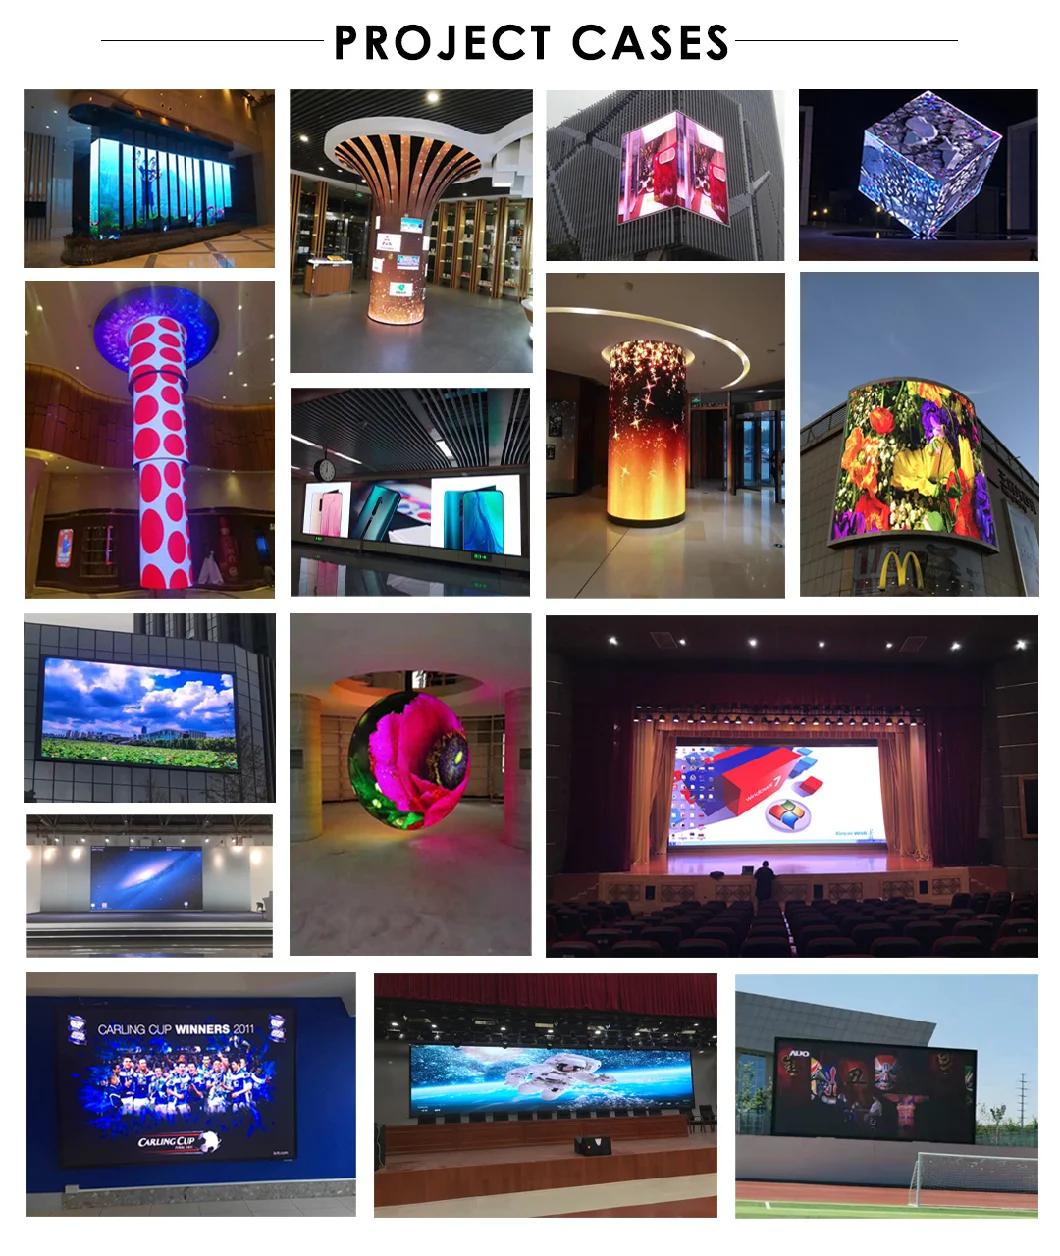 High Brightness Outdoor Long Distance Viewing SMD Giant LED Advertising Display Screen Video Wall Billboard P10